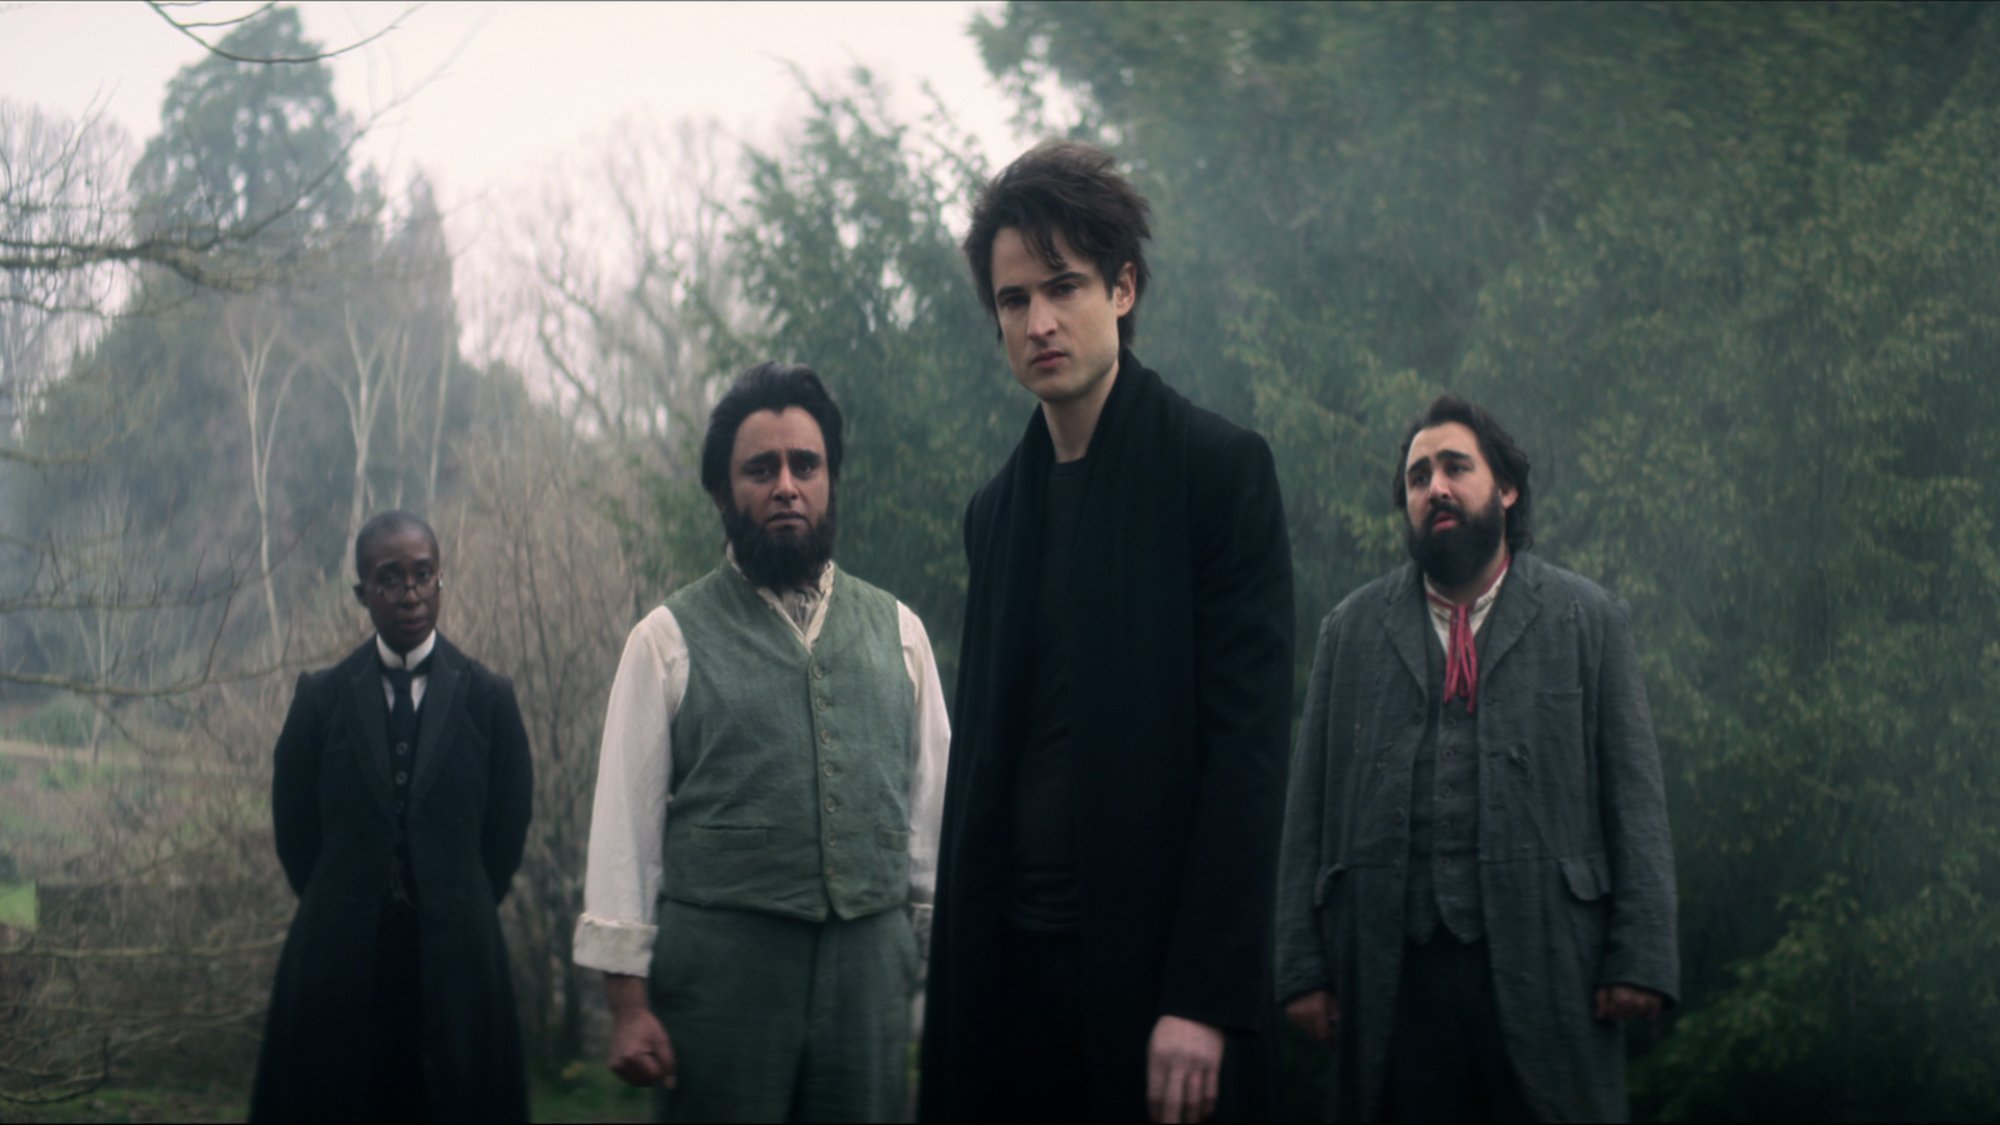 Four people in formal attire stand in a misty cottage yard looking sombre.